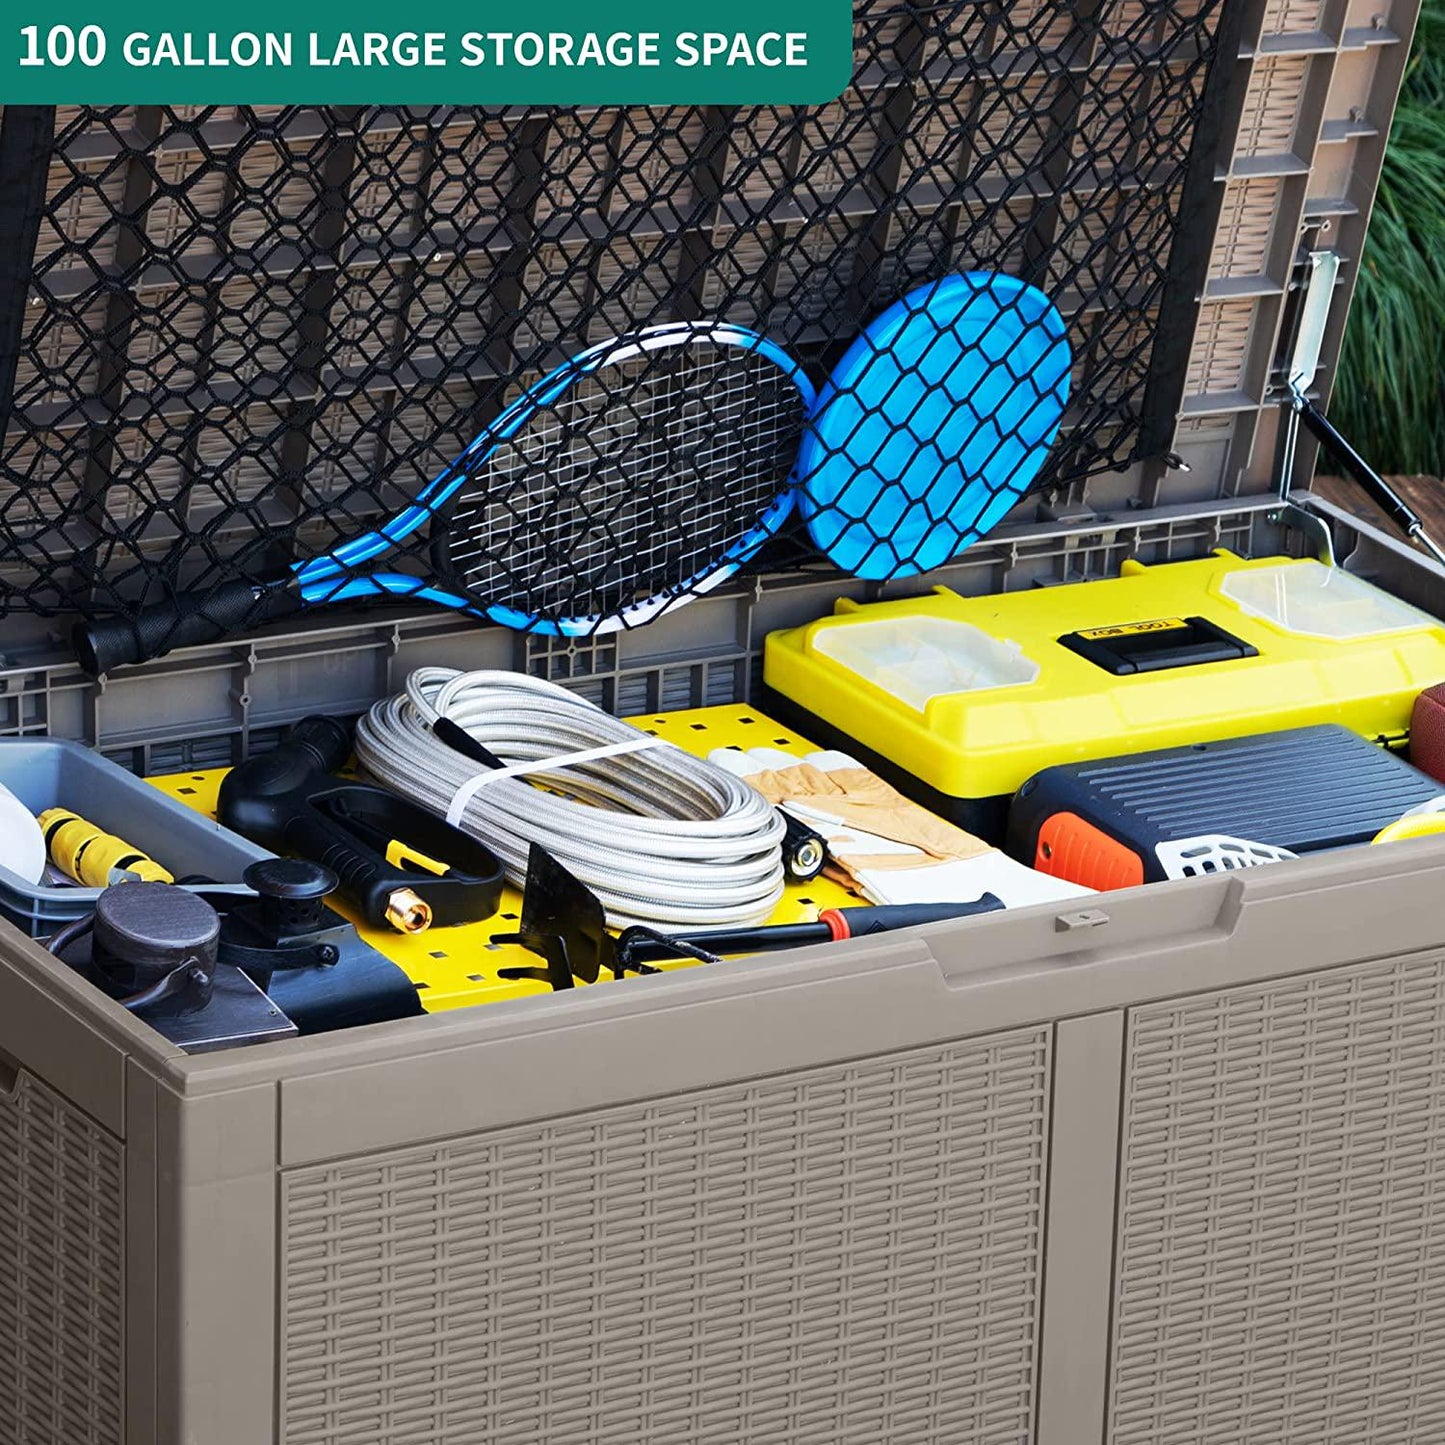 YITAHOME 100 Gallon Large Deck Box w/Storage Net, Resin Outdoor Storage Boxes, Waterproof Patio Cushion Storage Bench for Patio Furniture, Pool Supplies